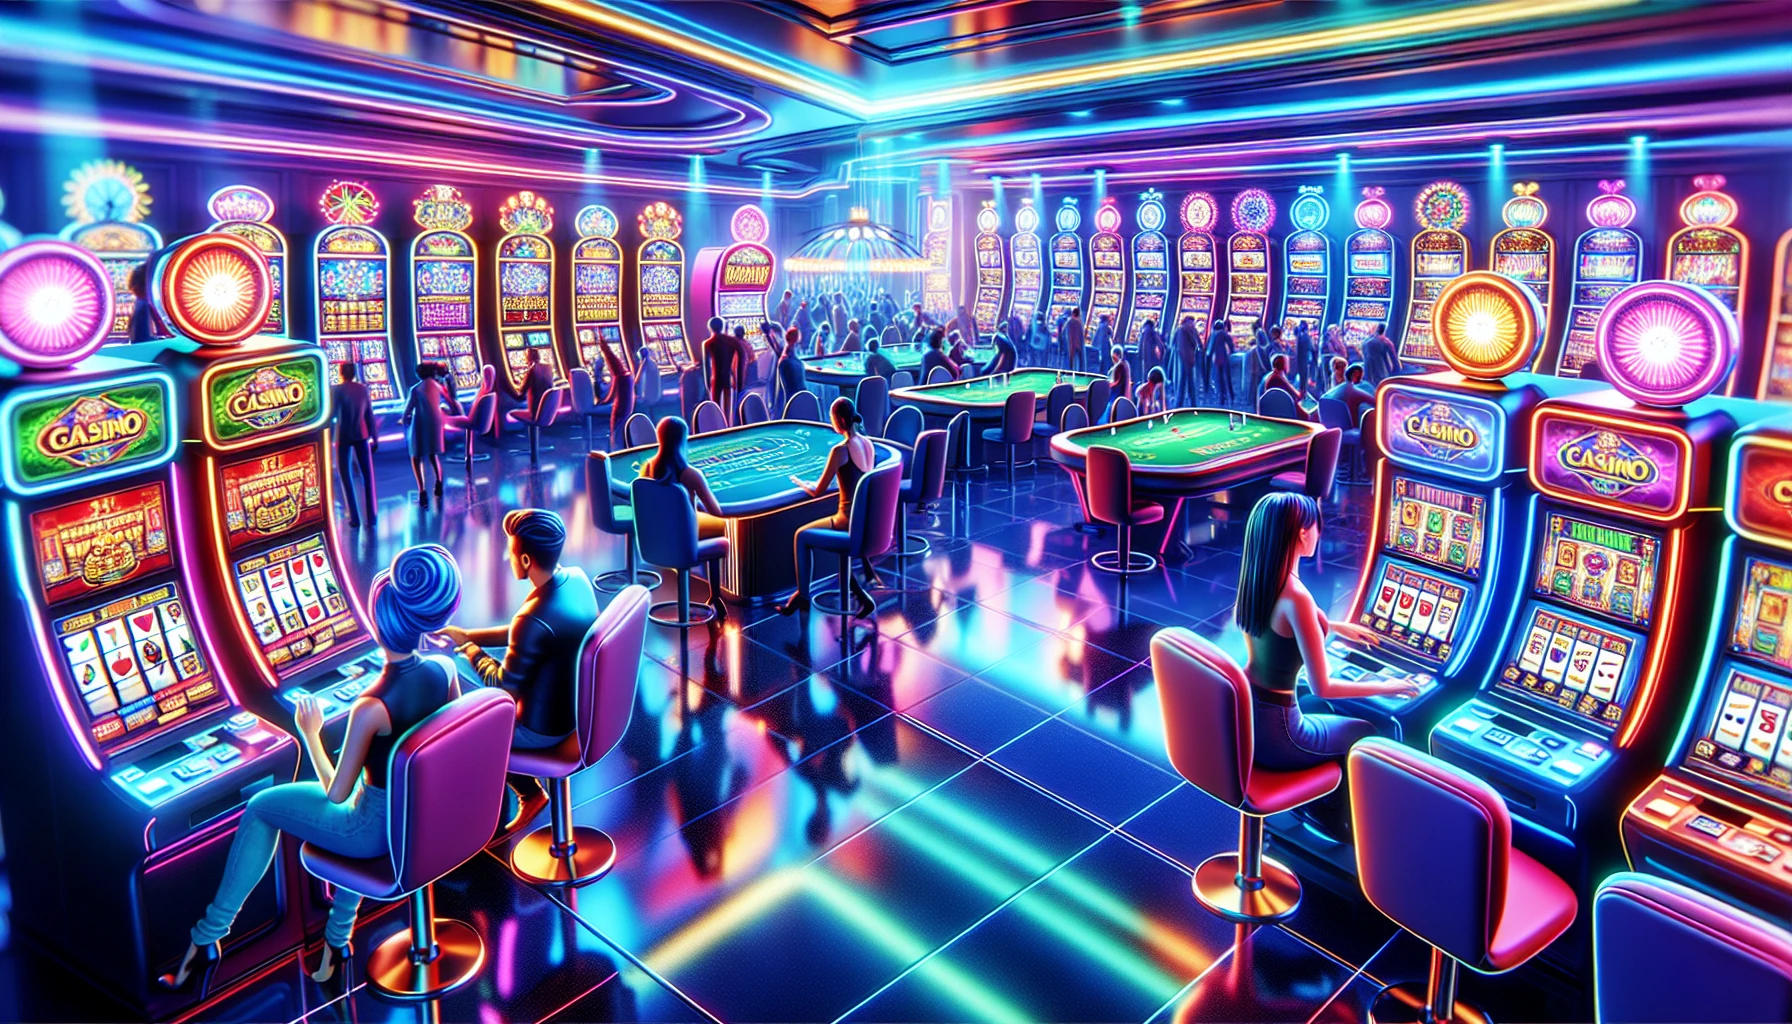 Illustration of a vibrant online casino with various slot machines and gaming tables